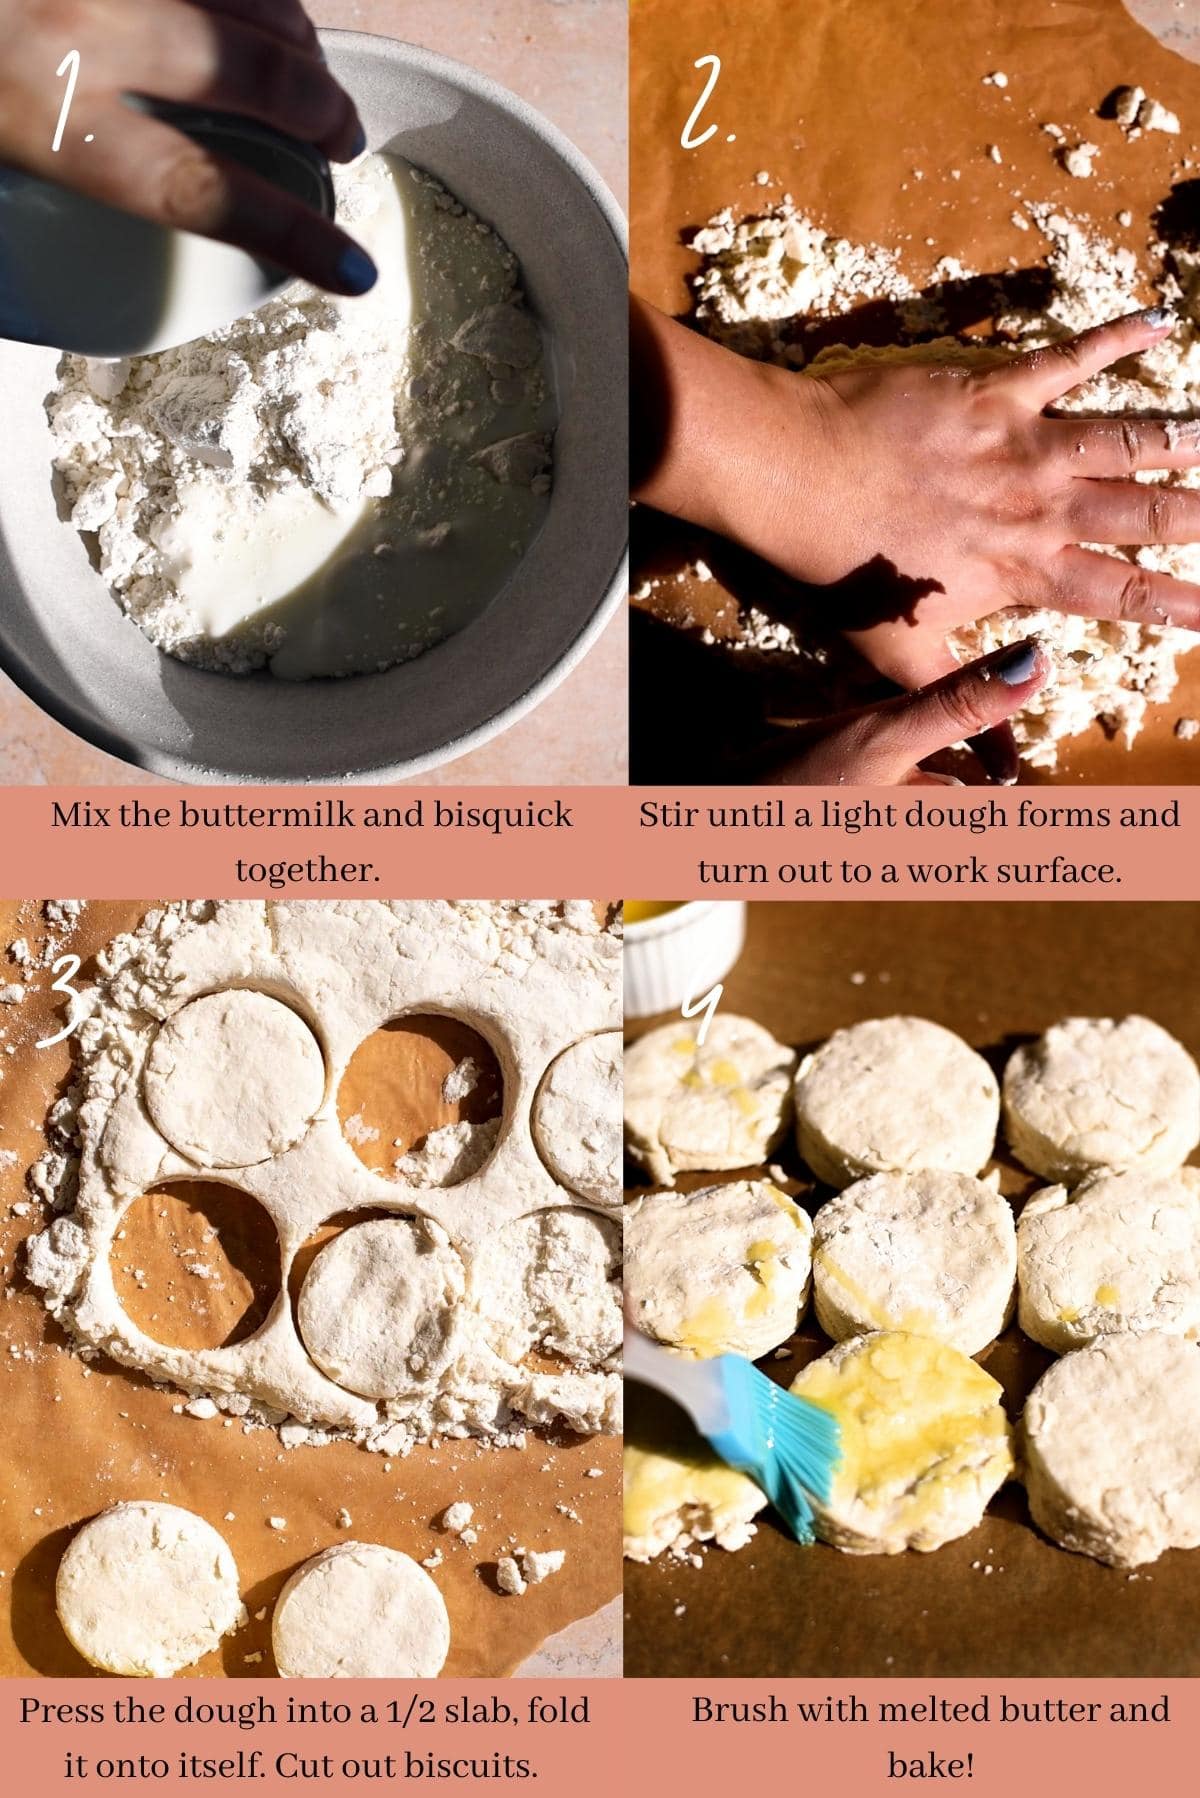 Collage showing how to make Bisquick biscuits.